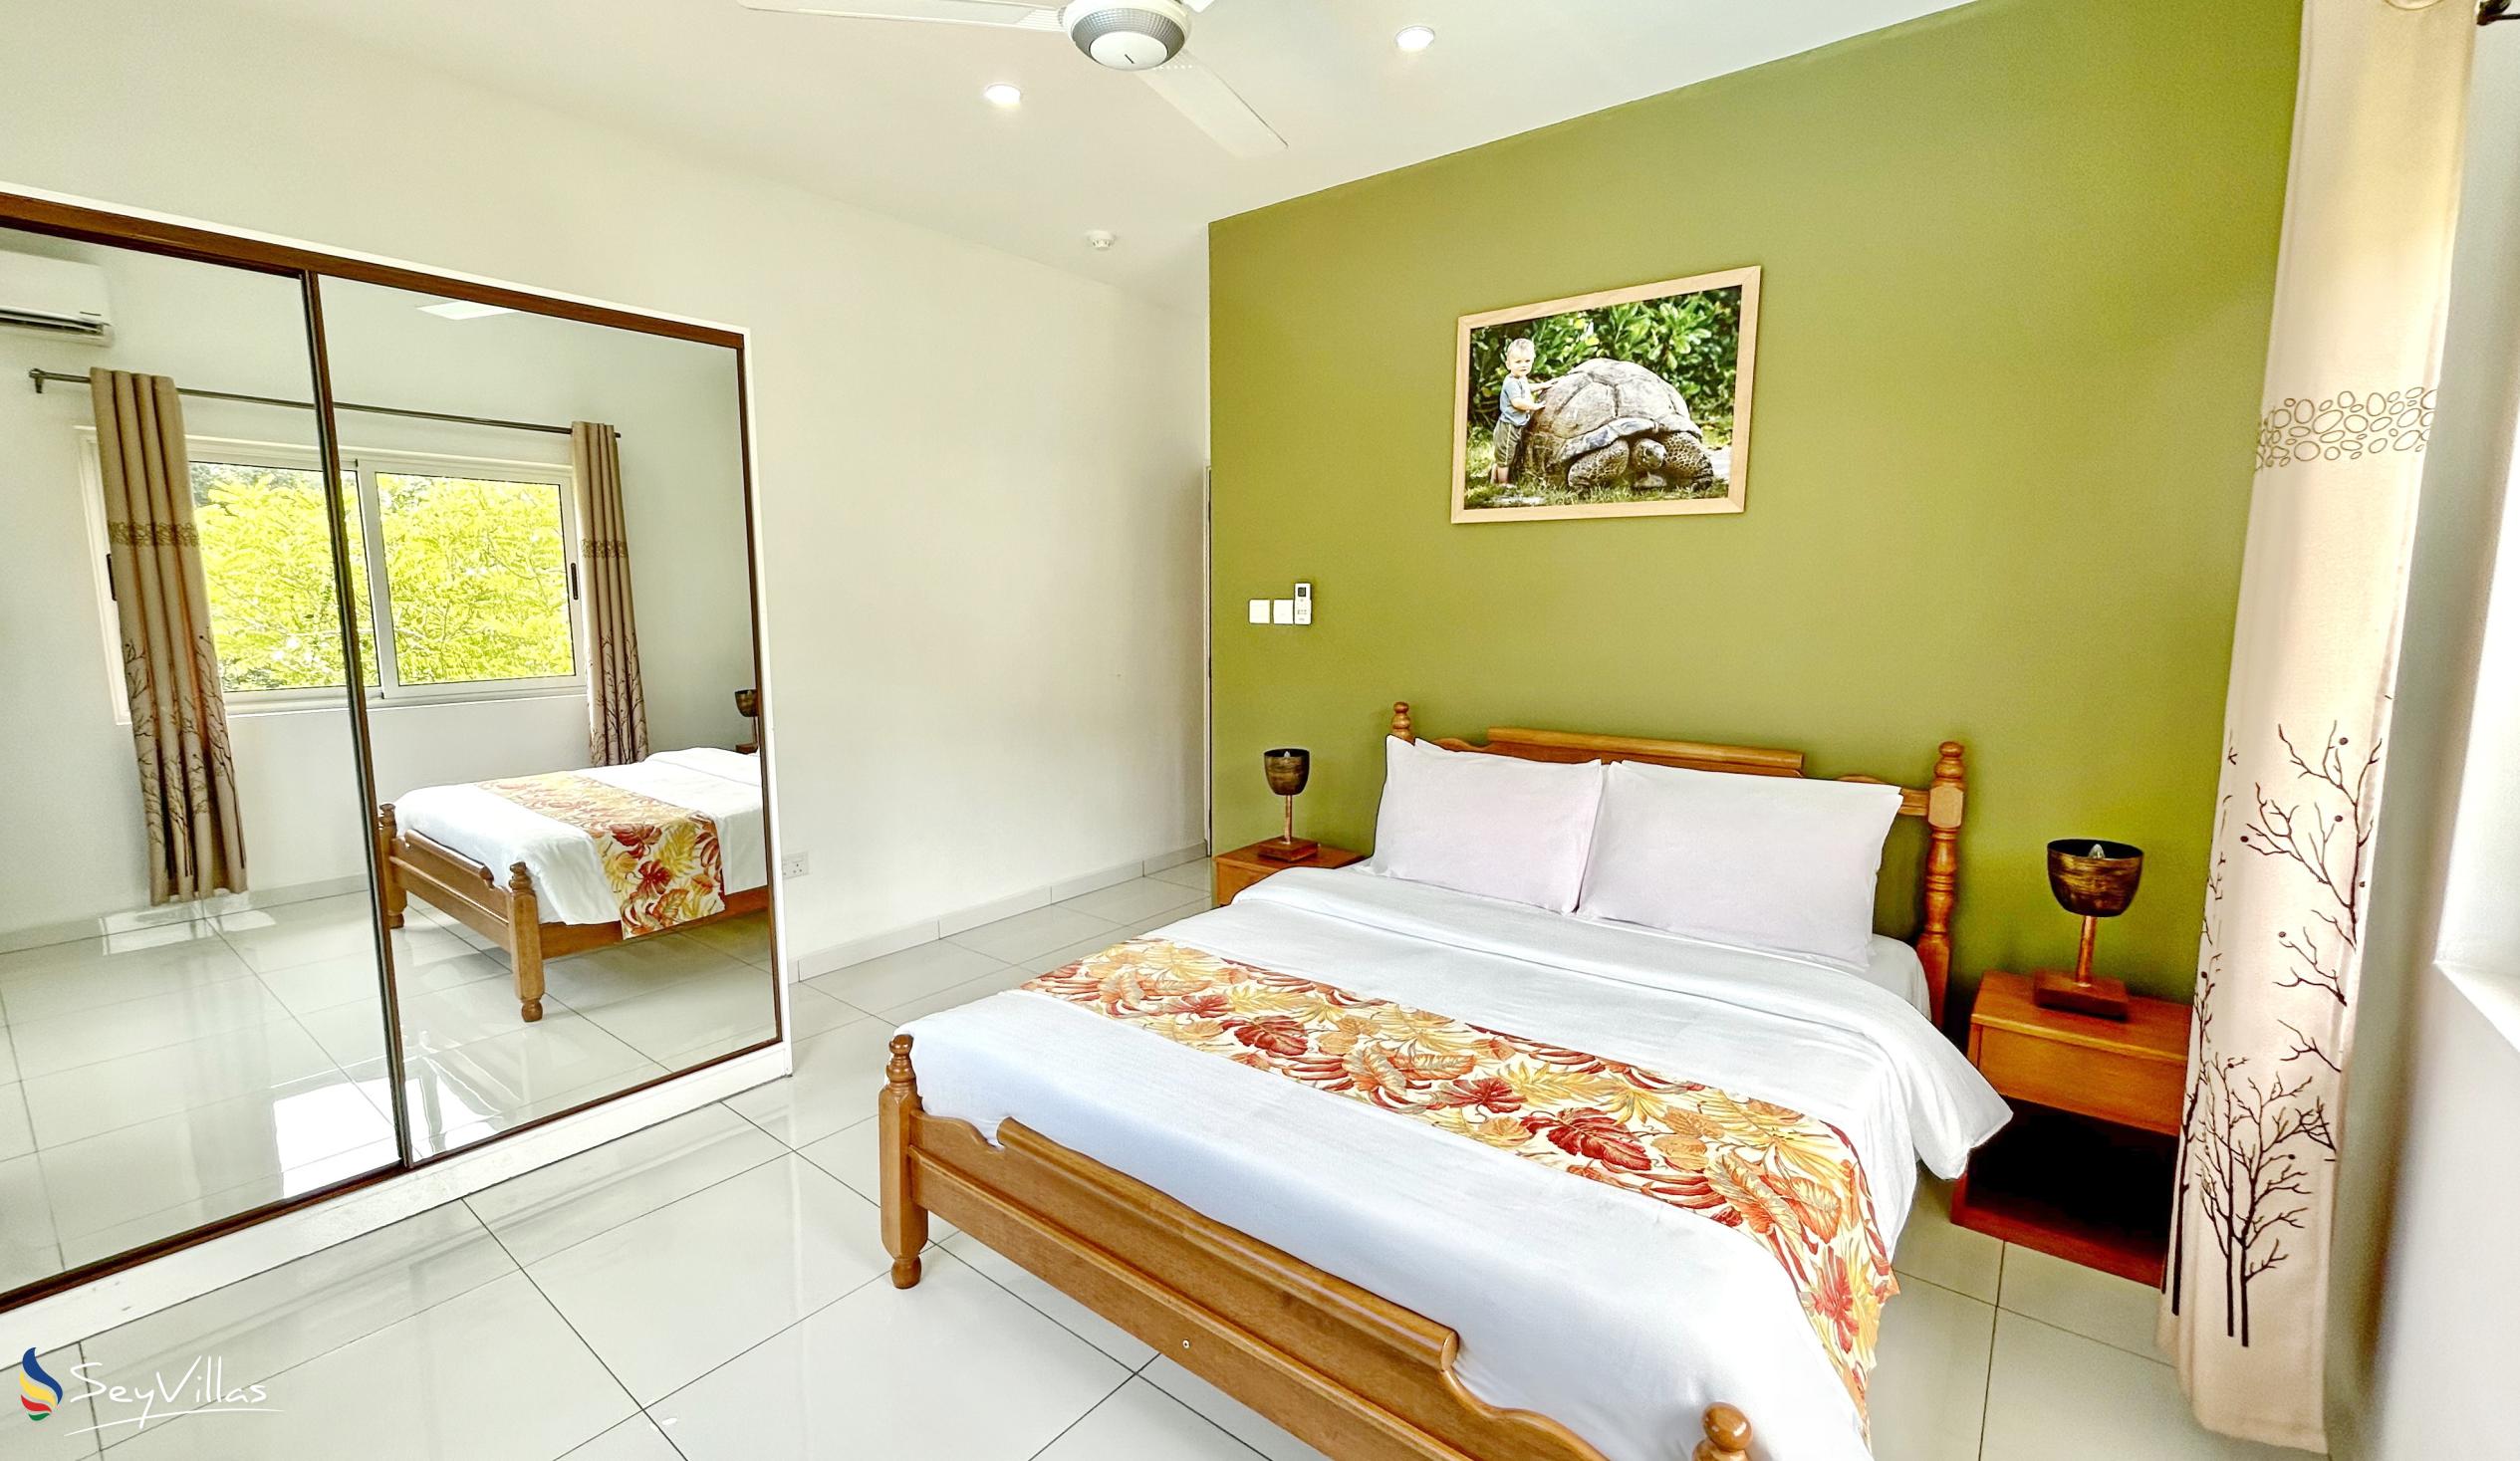 Foto 46: The Seaboards Apartments - Appartement 2 chambres - Mahé (Seychelles)